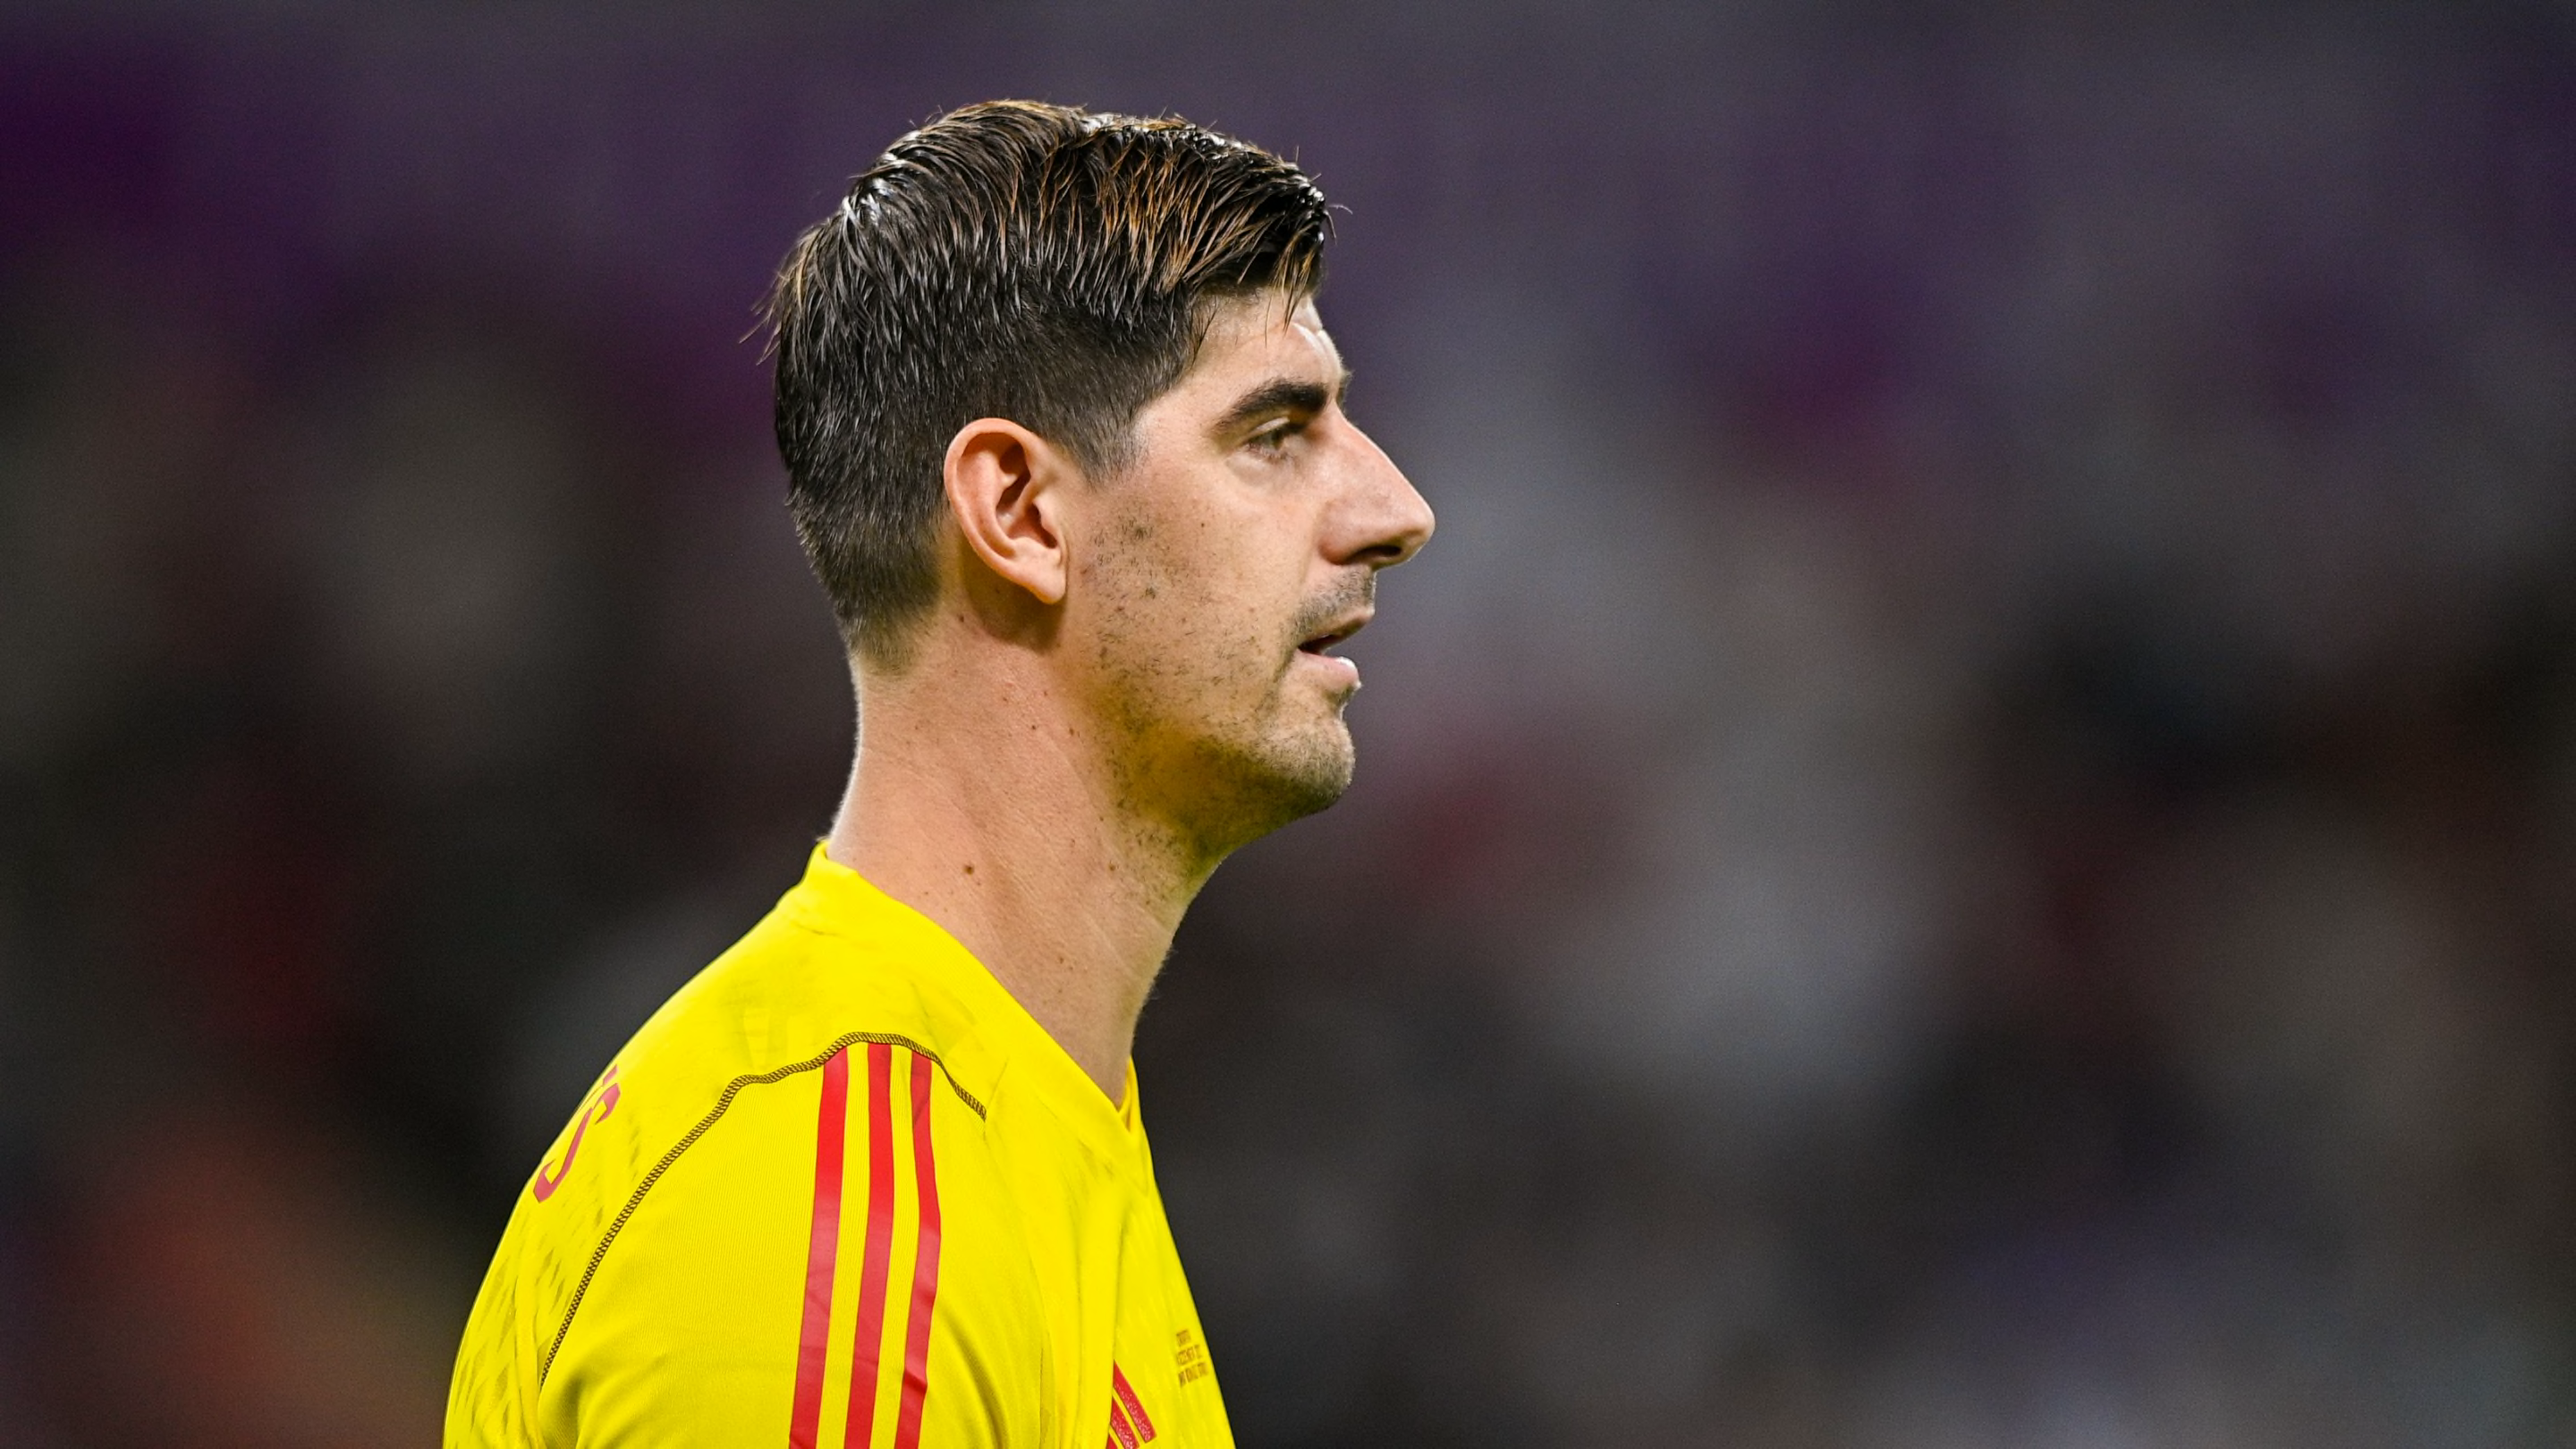 2022 World Cup goalkeeper power rankings: Matchday 3